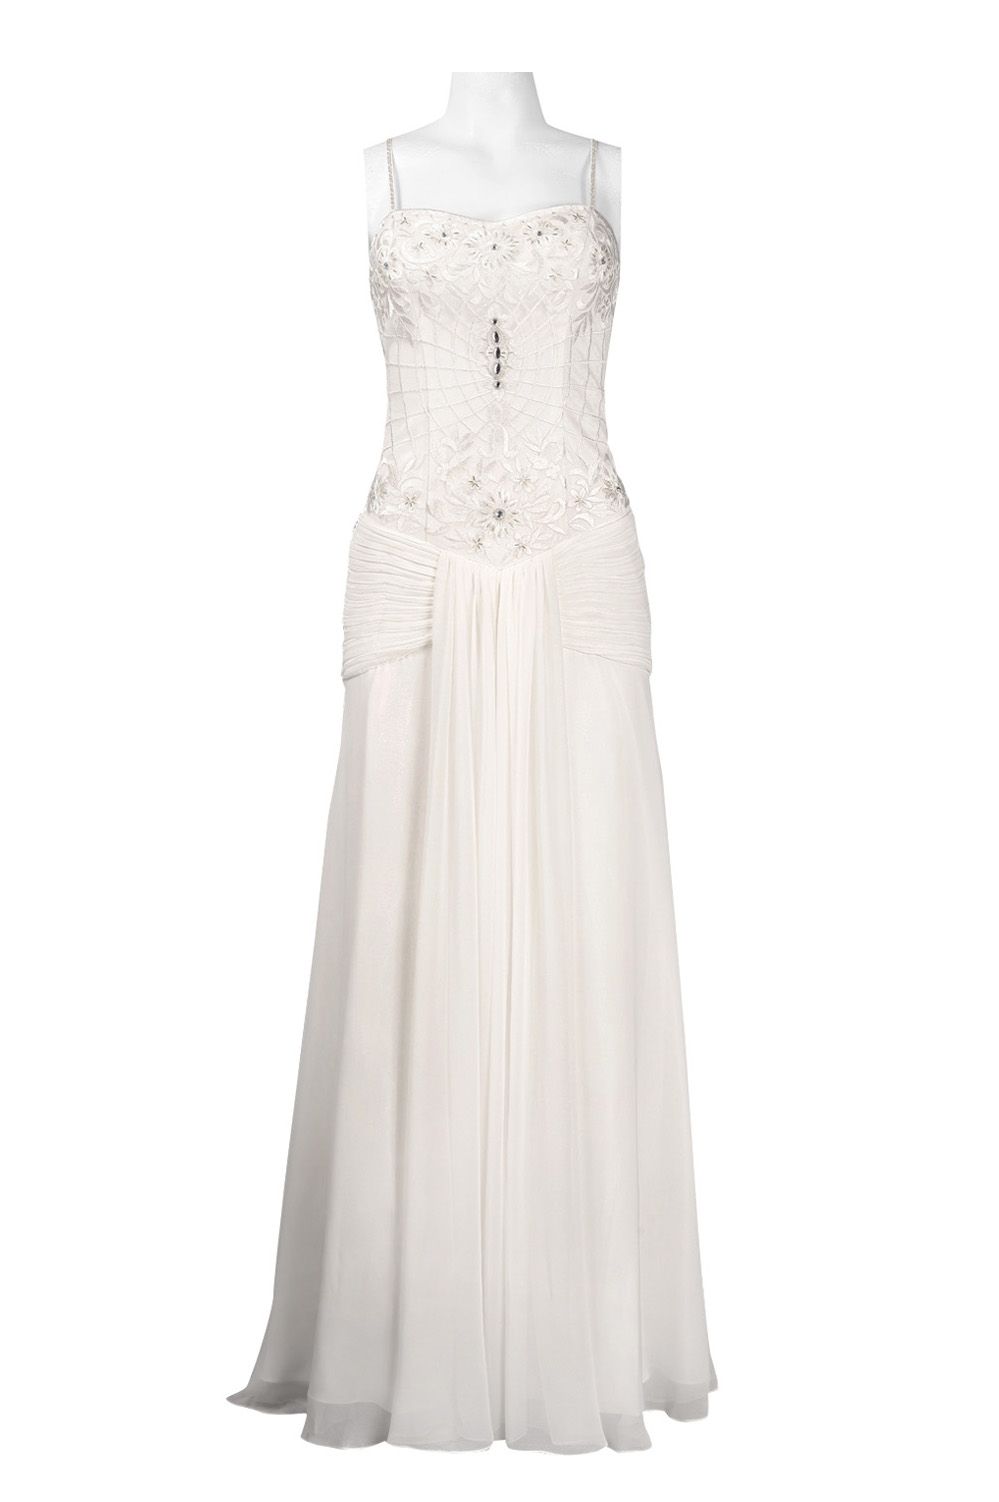 White/Ivory Embroidered Chiffon Gown Sizes 4/6/10